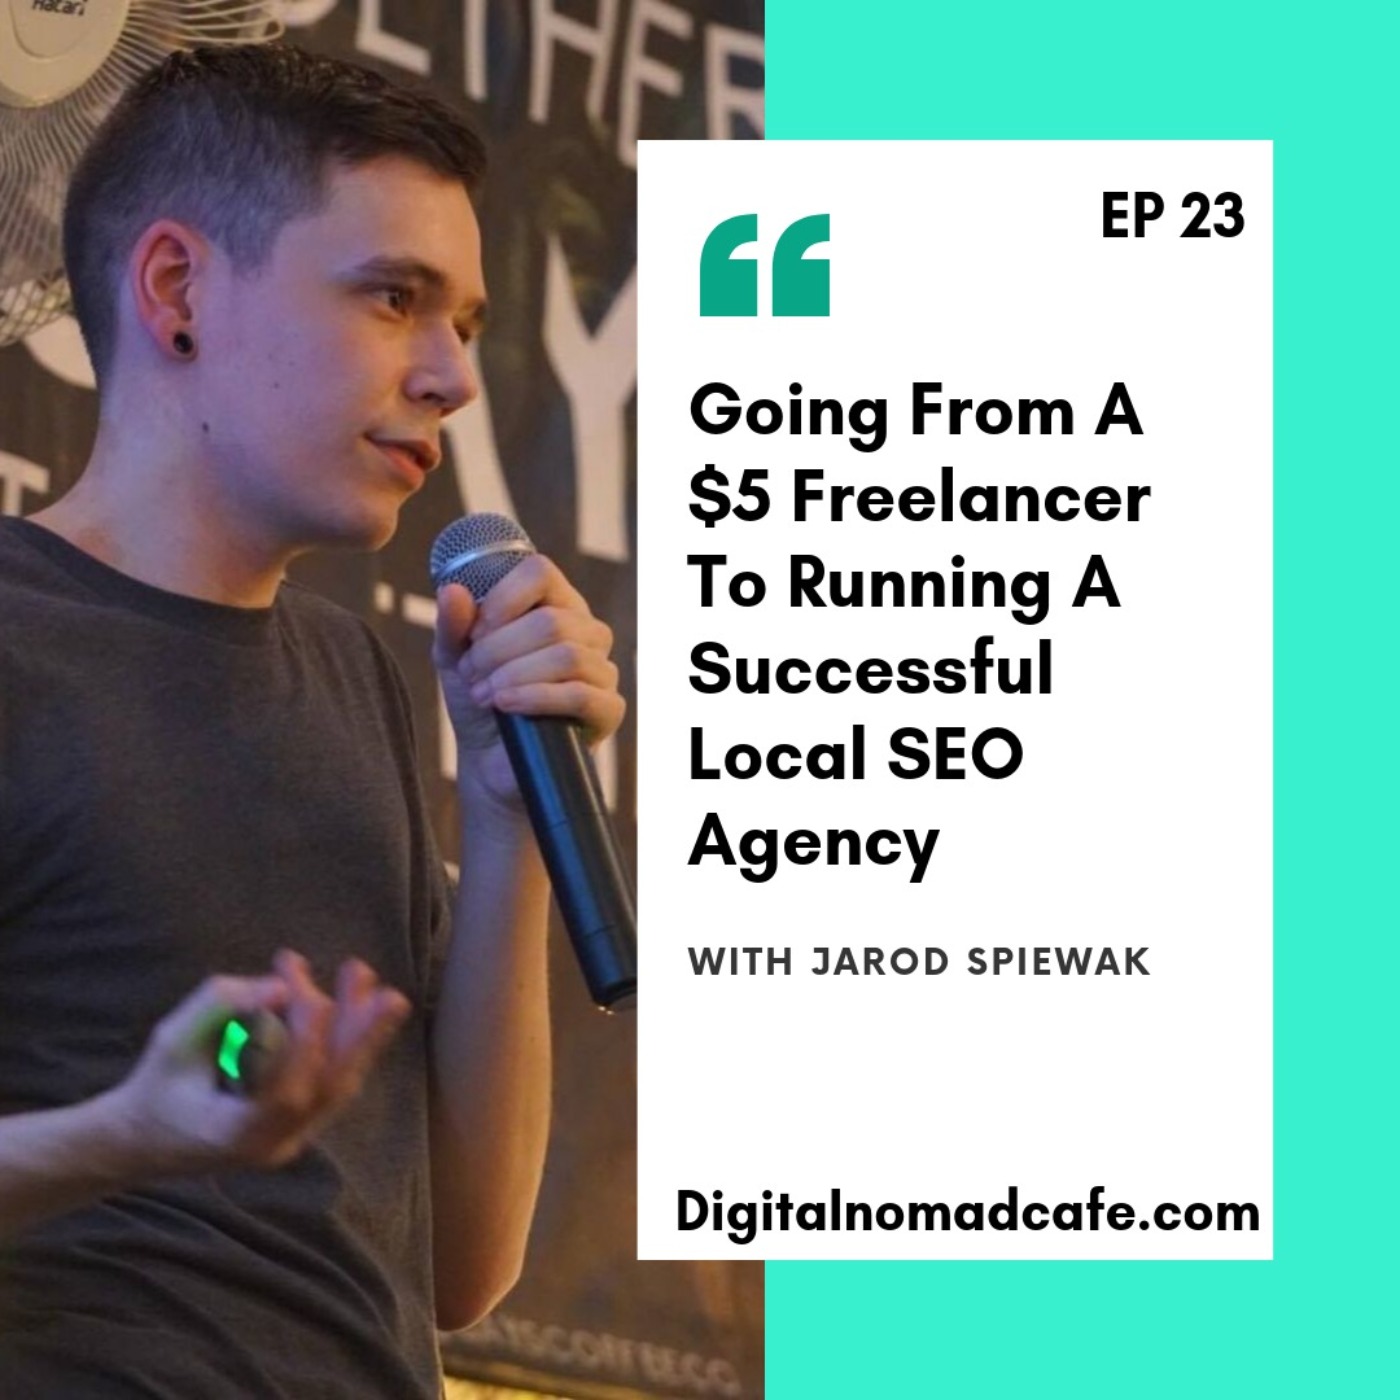 EP23 -$5 Freelancer to Running A Successful Local SEO Agency - Tips from Jarod Spiewak